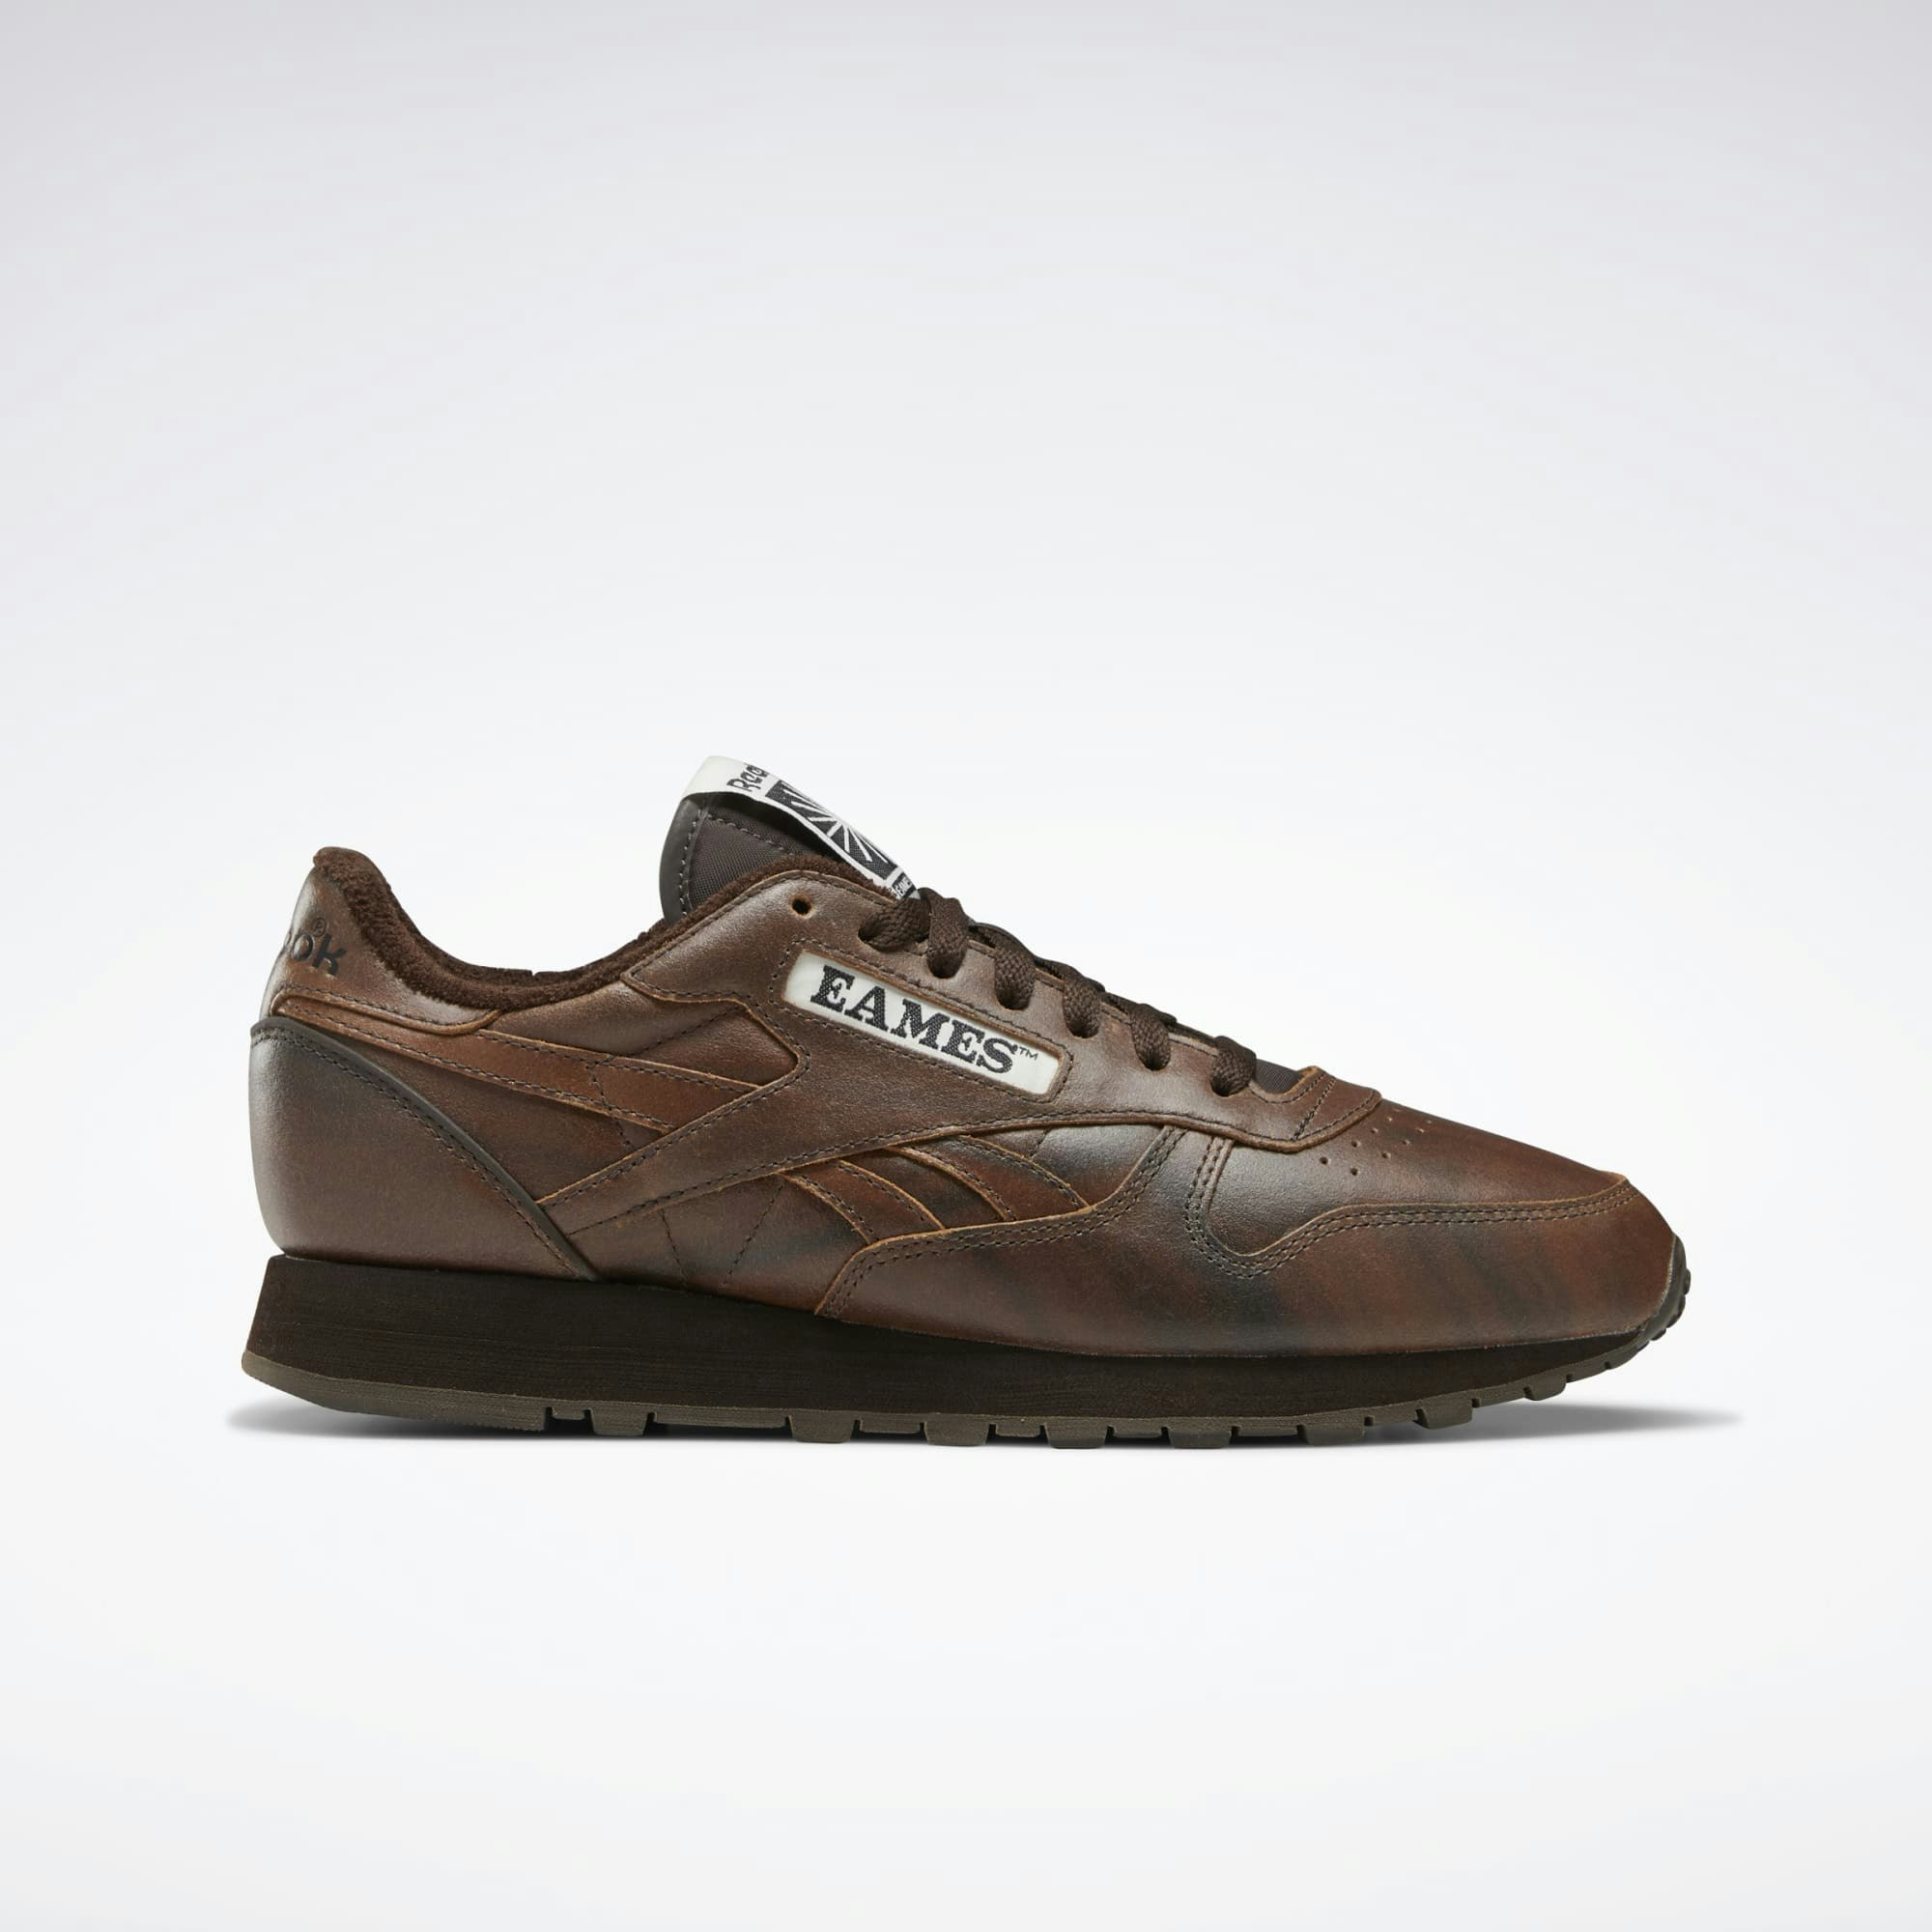 Eames x Reebok Classic Leather "Rosewood"